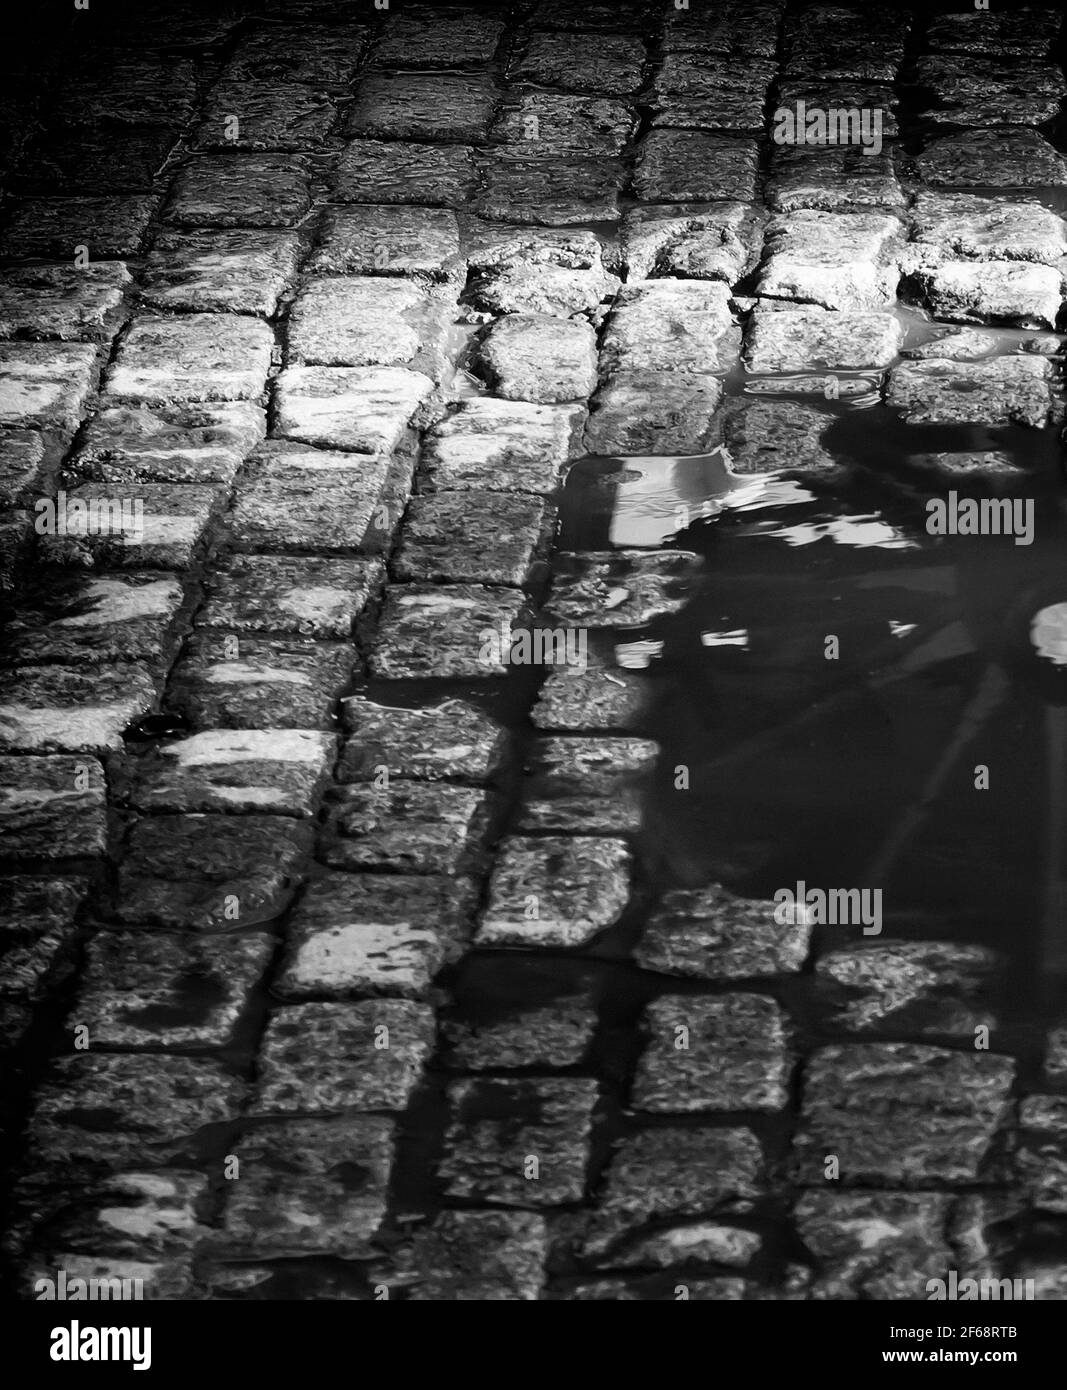 Wooden wheel of a horse cart reflected in a water puddle after the rain. Black and white photo. Stock Photo